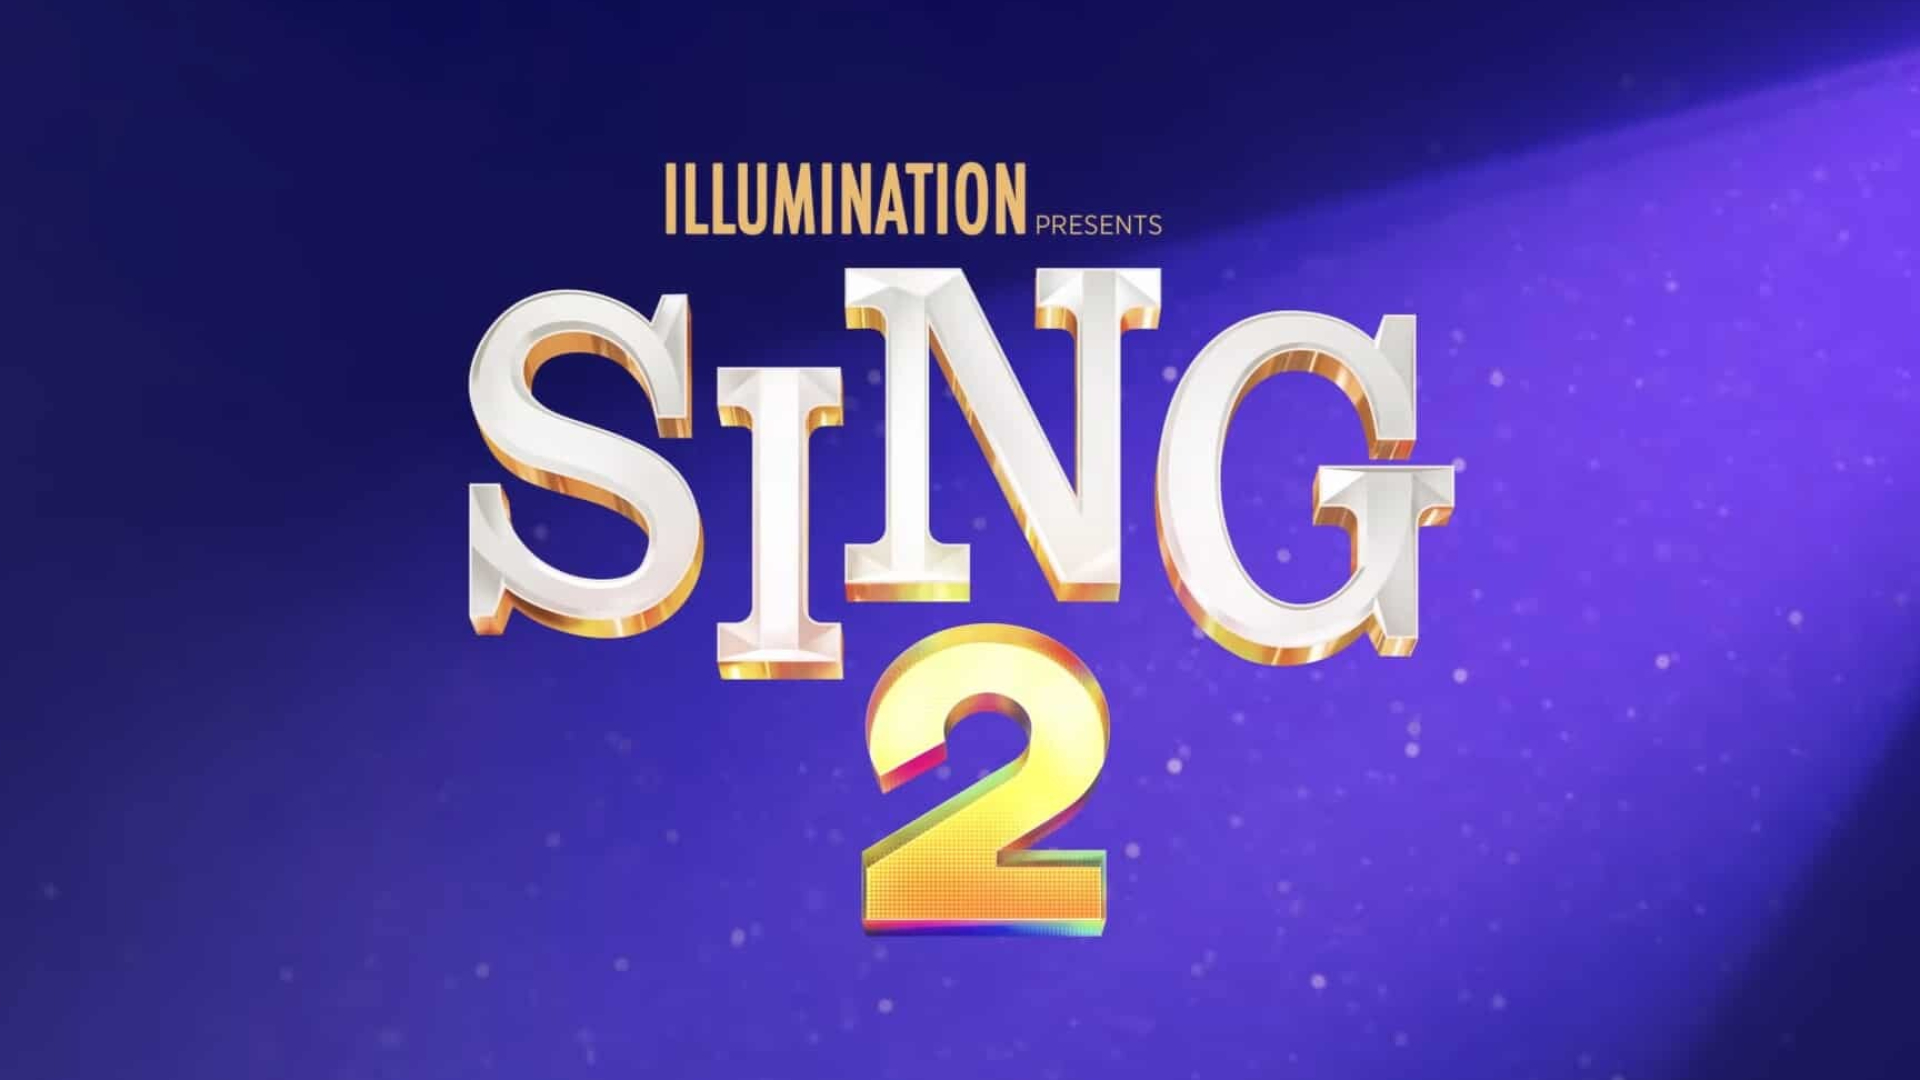 Sing 2: Animated comedy, Featuring an ensemble cast of actors, Matthew McConaughey, Taron Egerton, Reese Witherspoon, Scarlett Johansson. 1920x1080 Full HD Wallpaper.